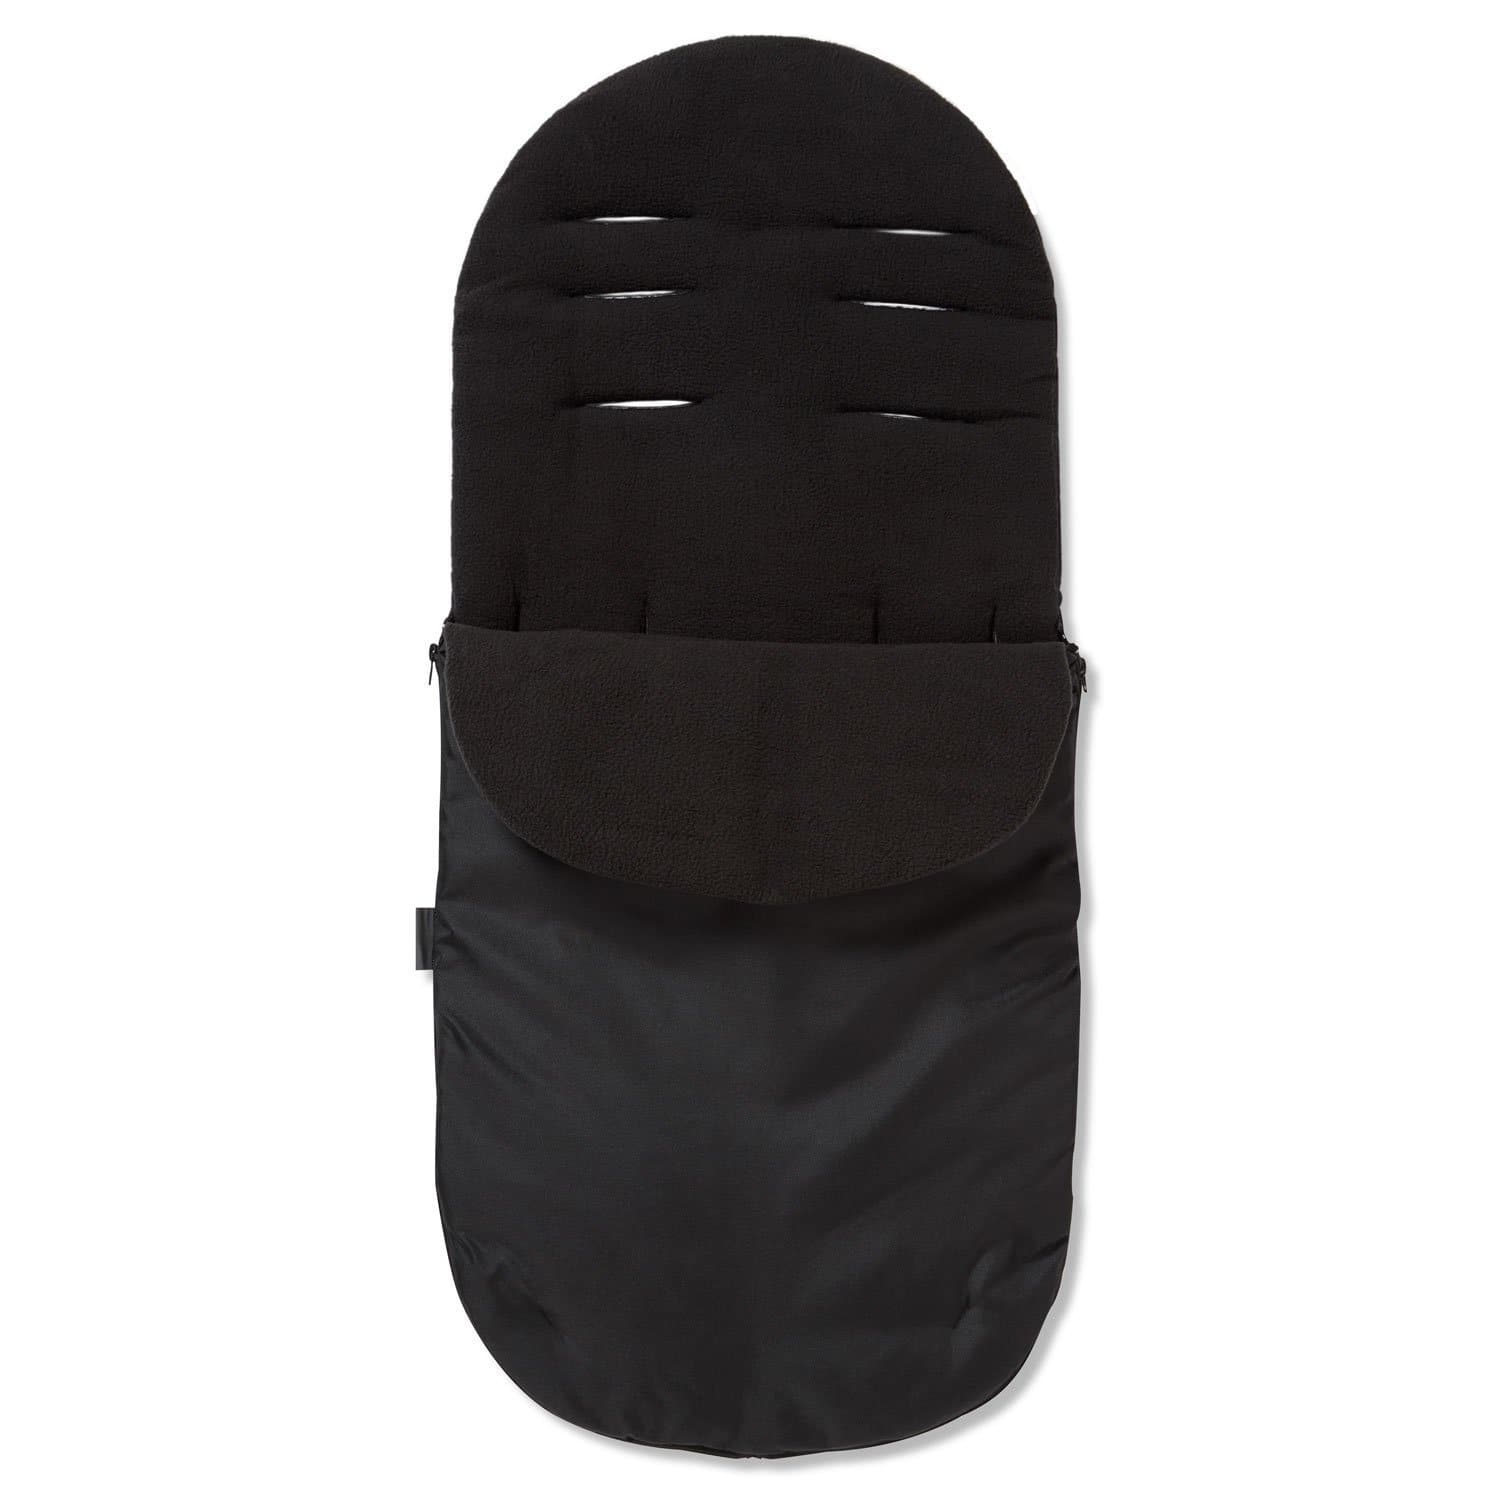 Footmuff / Cosy Toes Compatible with Concord - Black / Fits All Models | For Your Little One